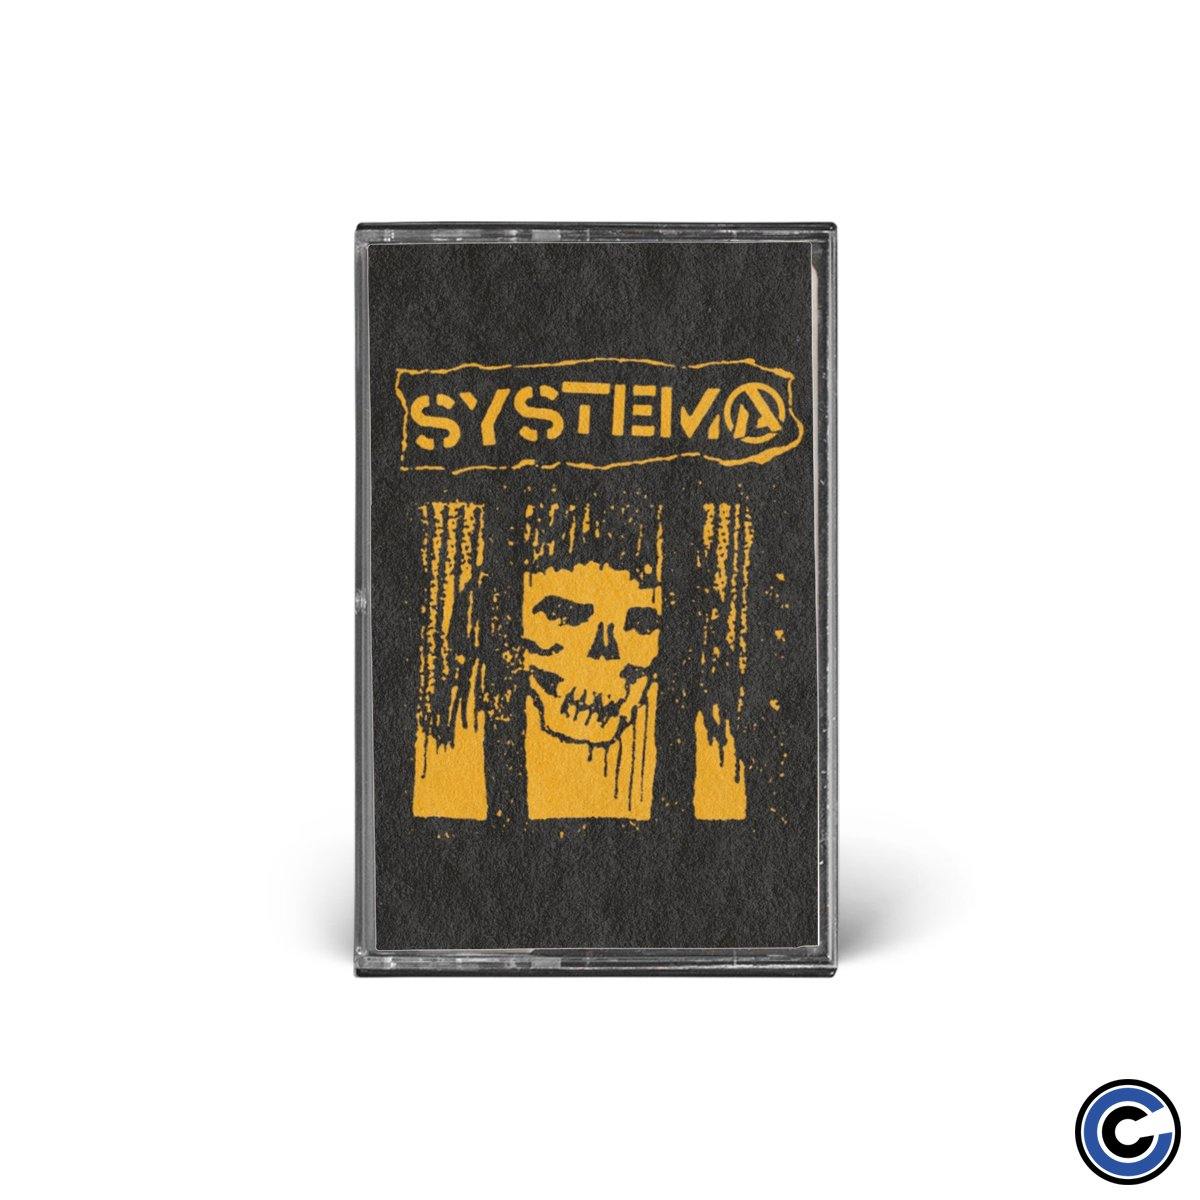 Buy – Systema "Systema" Cassette – Band & Music Merch – Cold Cuts Merch